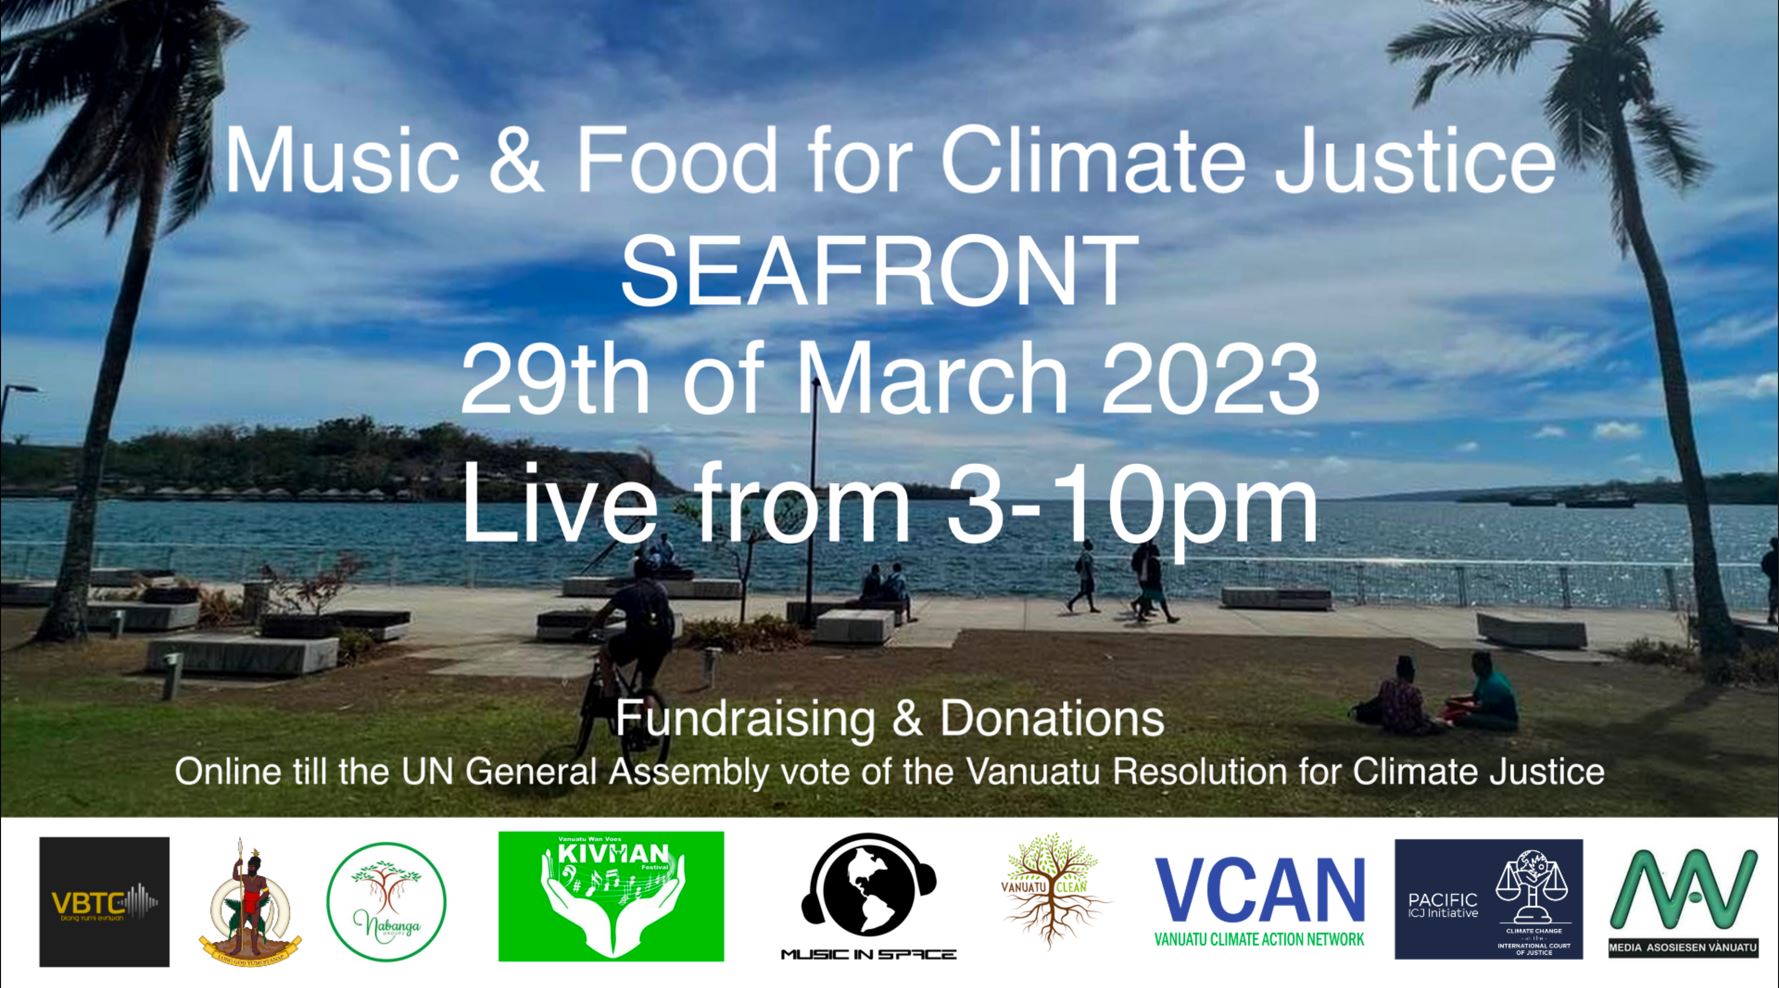 Music & Food for Climate Justice at SEAFRONT - Online UN General Assembly Vote